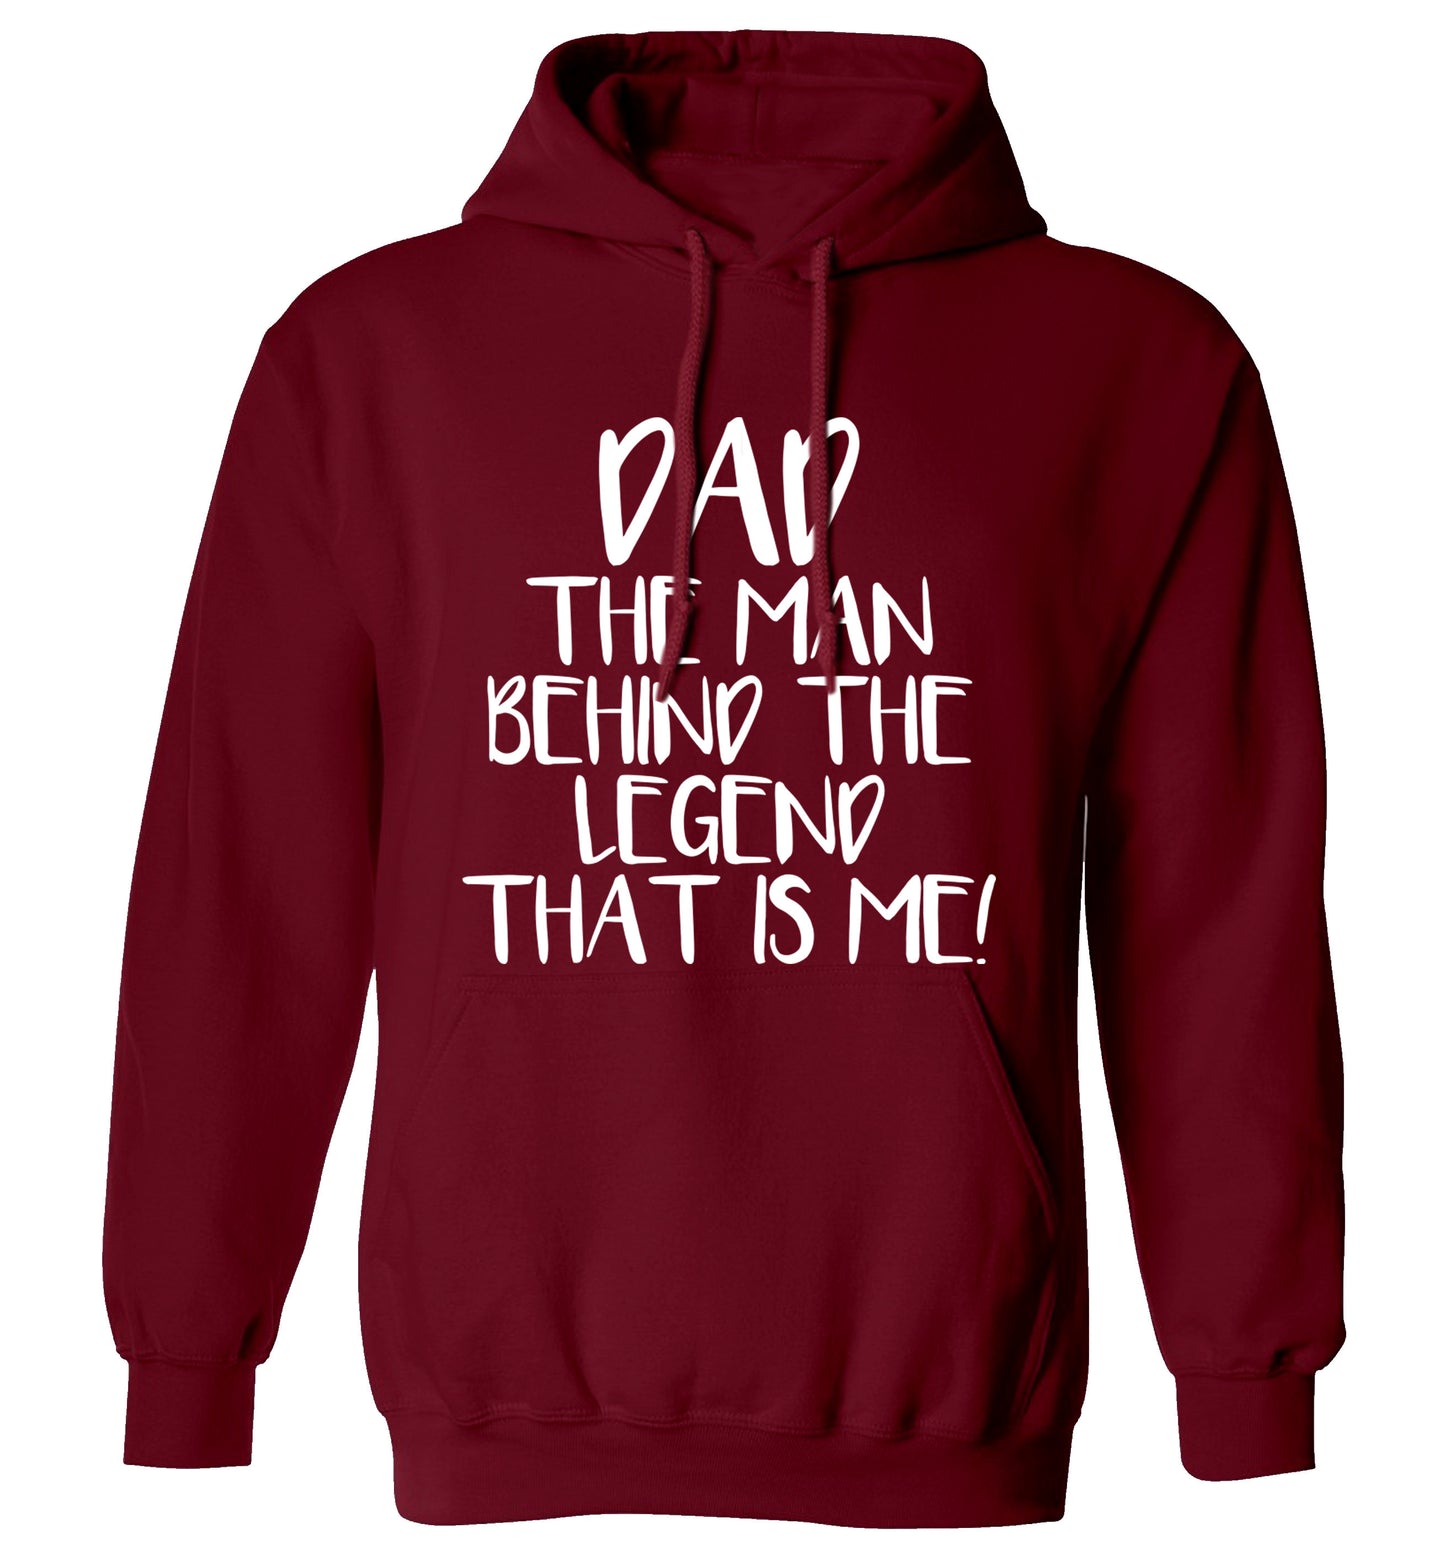 Dad the man behind the legend that is me! adults unisex maroon hoodie 2XL